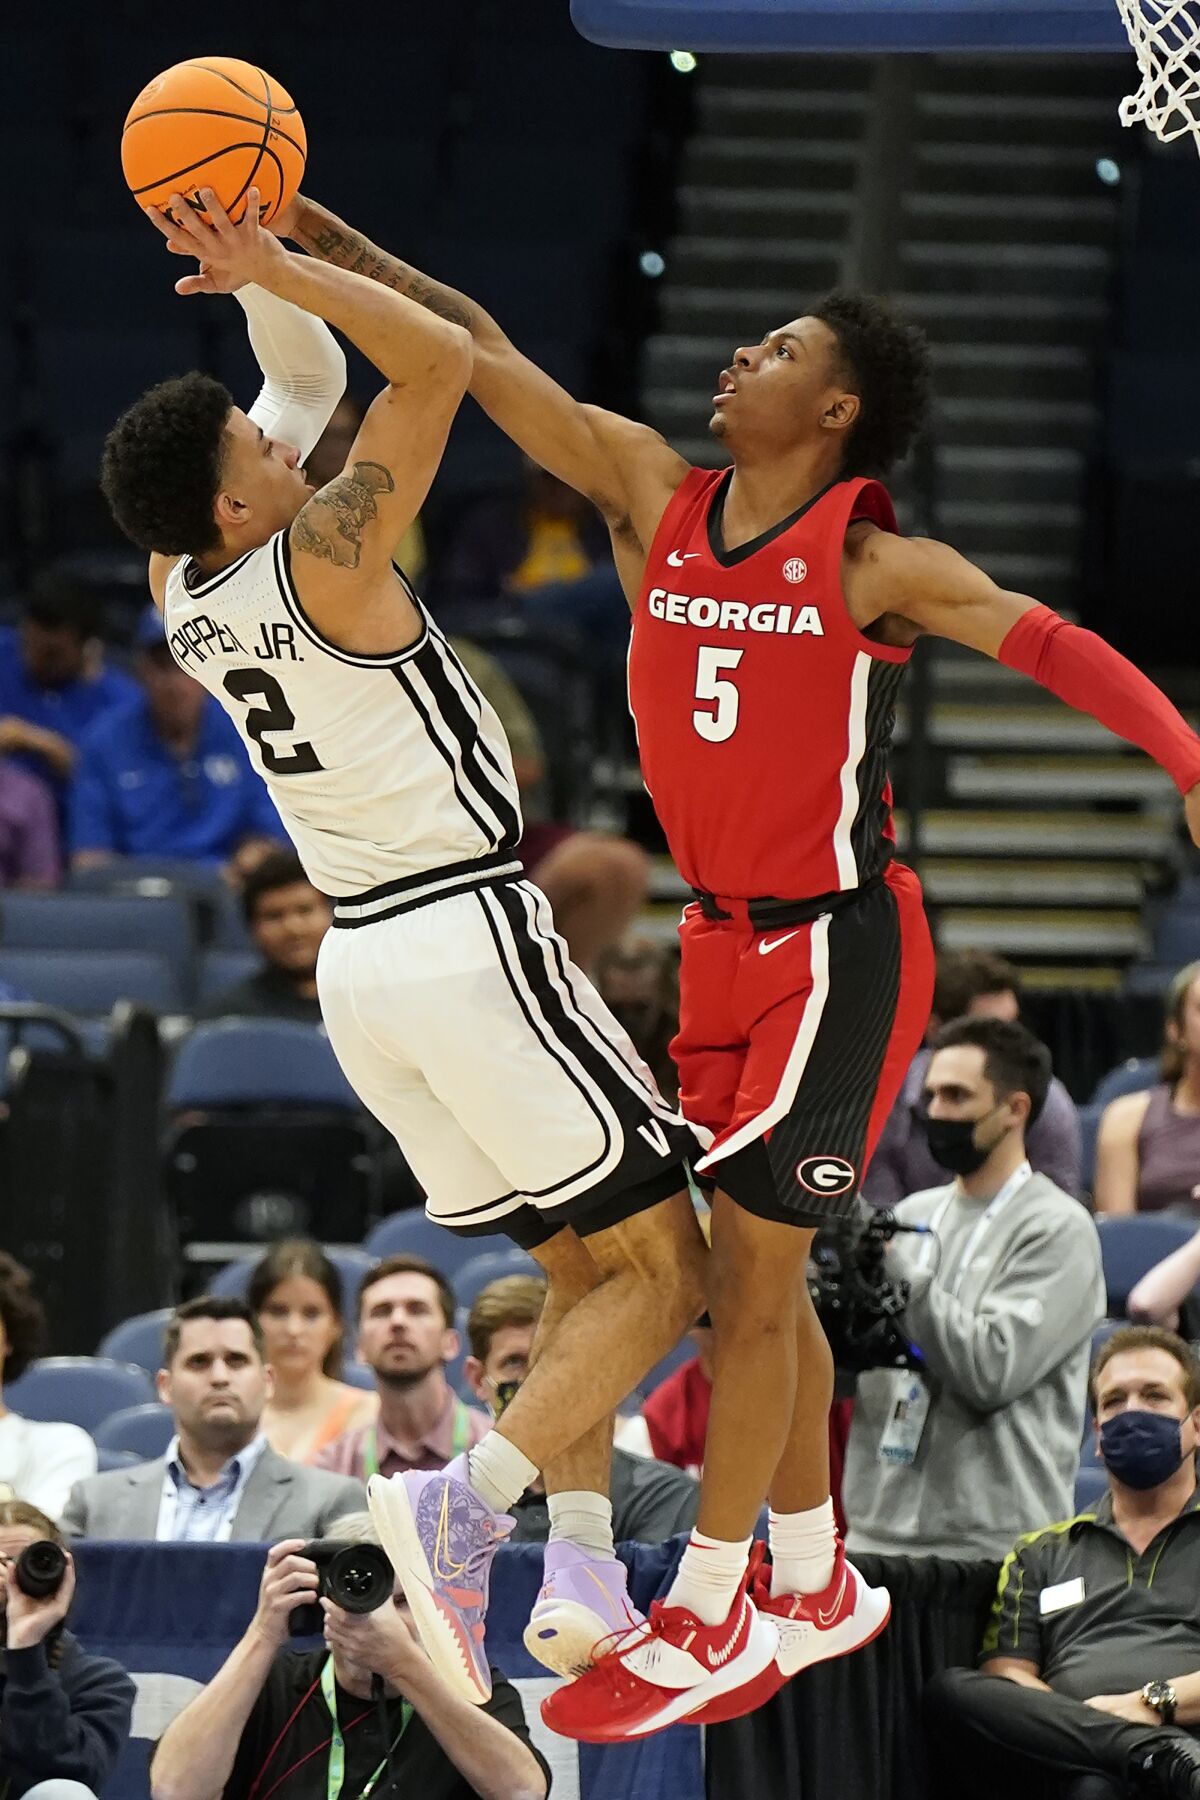 Vanderbilt guard Scotty Pippen Jr. (2) shoots over Georgia guard Christian Wright (5) during the second half of an NCAA college basketball game in the Southeastern Conference men's tournament Wednesday, March 9, 2022, in Tampa, Fla. (AP Photo/Chris O'Meara)